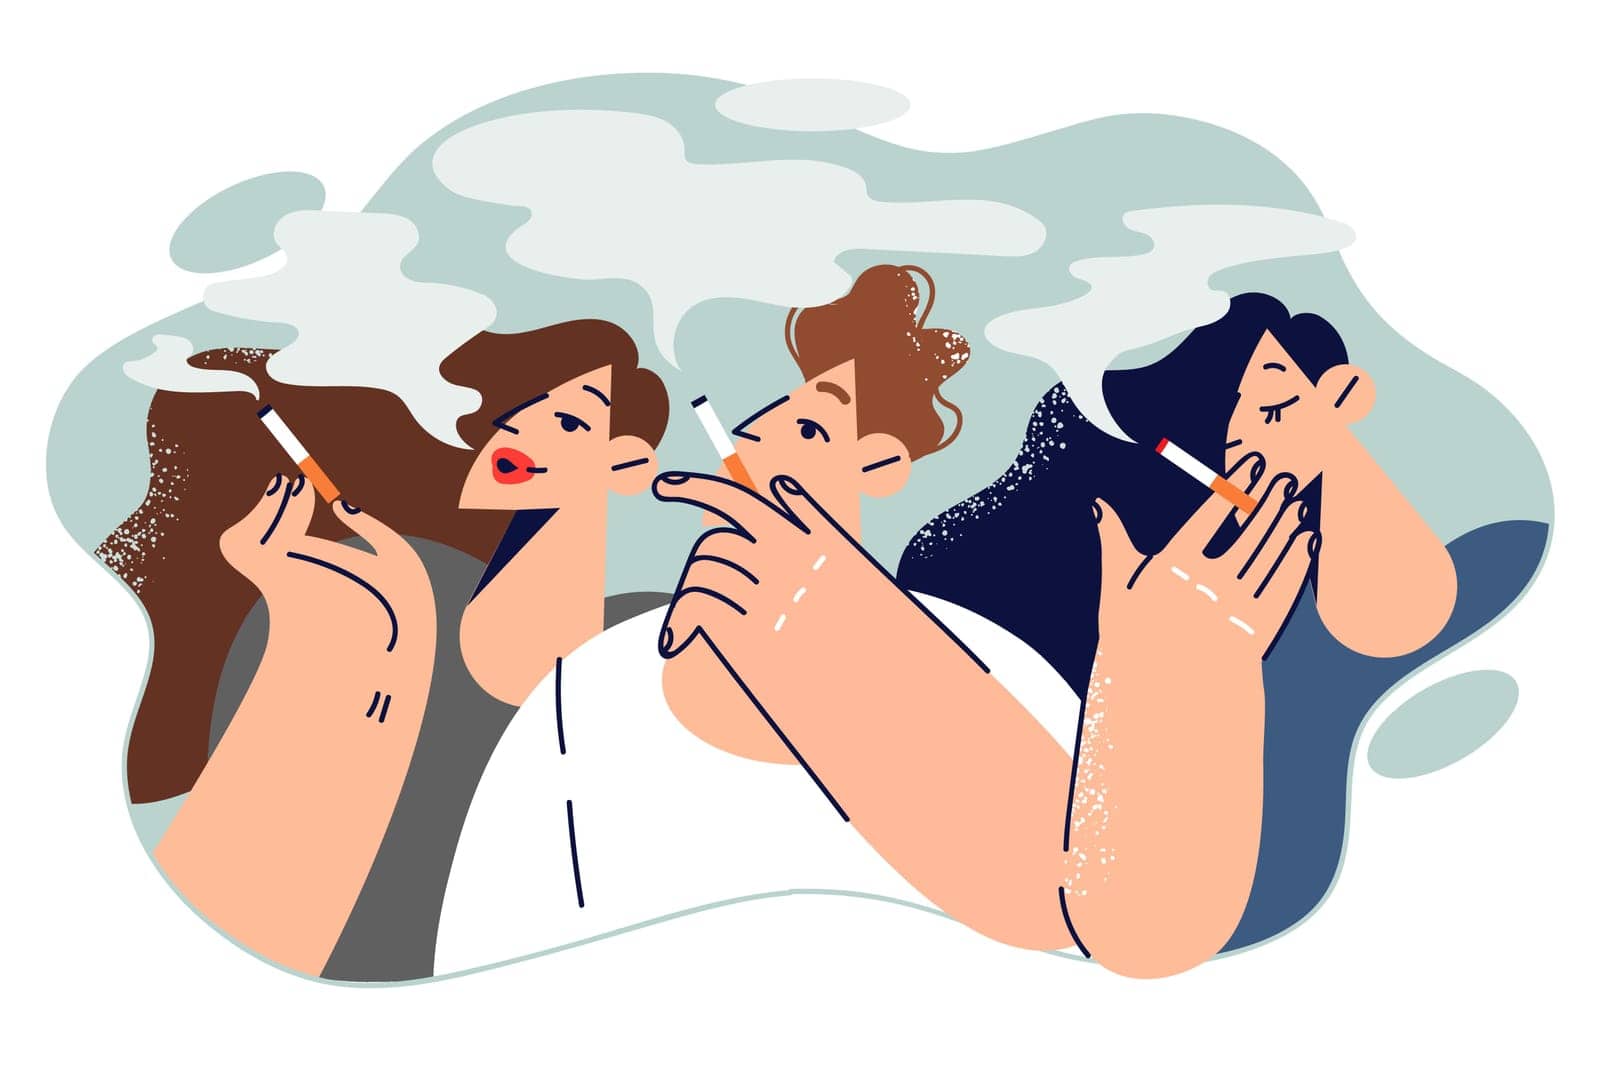 People smoke cigarettes and exhale fumes, risking lung cancer or making passersby passive smokers by Vasilyeu